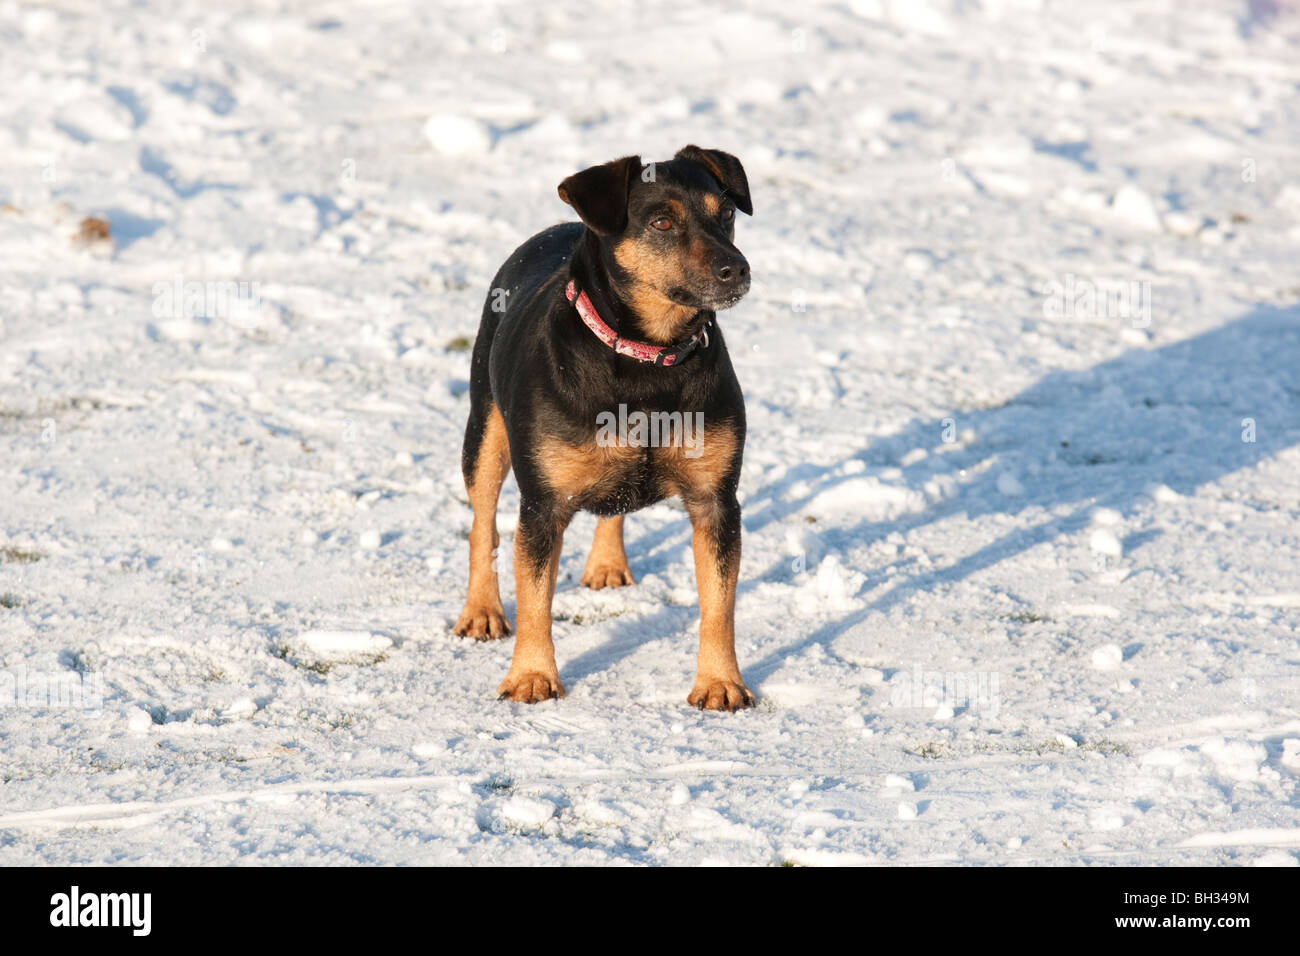 Black And Tan Terrier High Resolution Stock Photography And Images Alamy